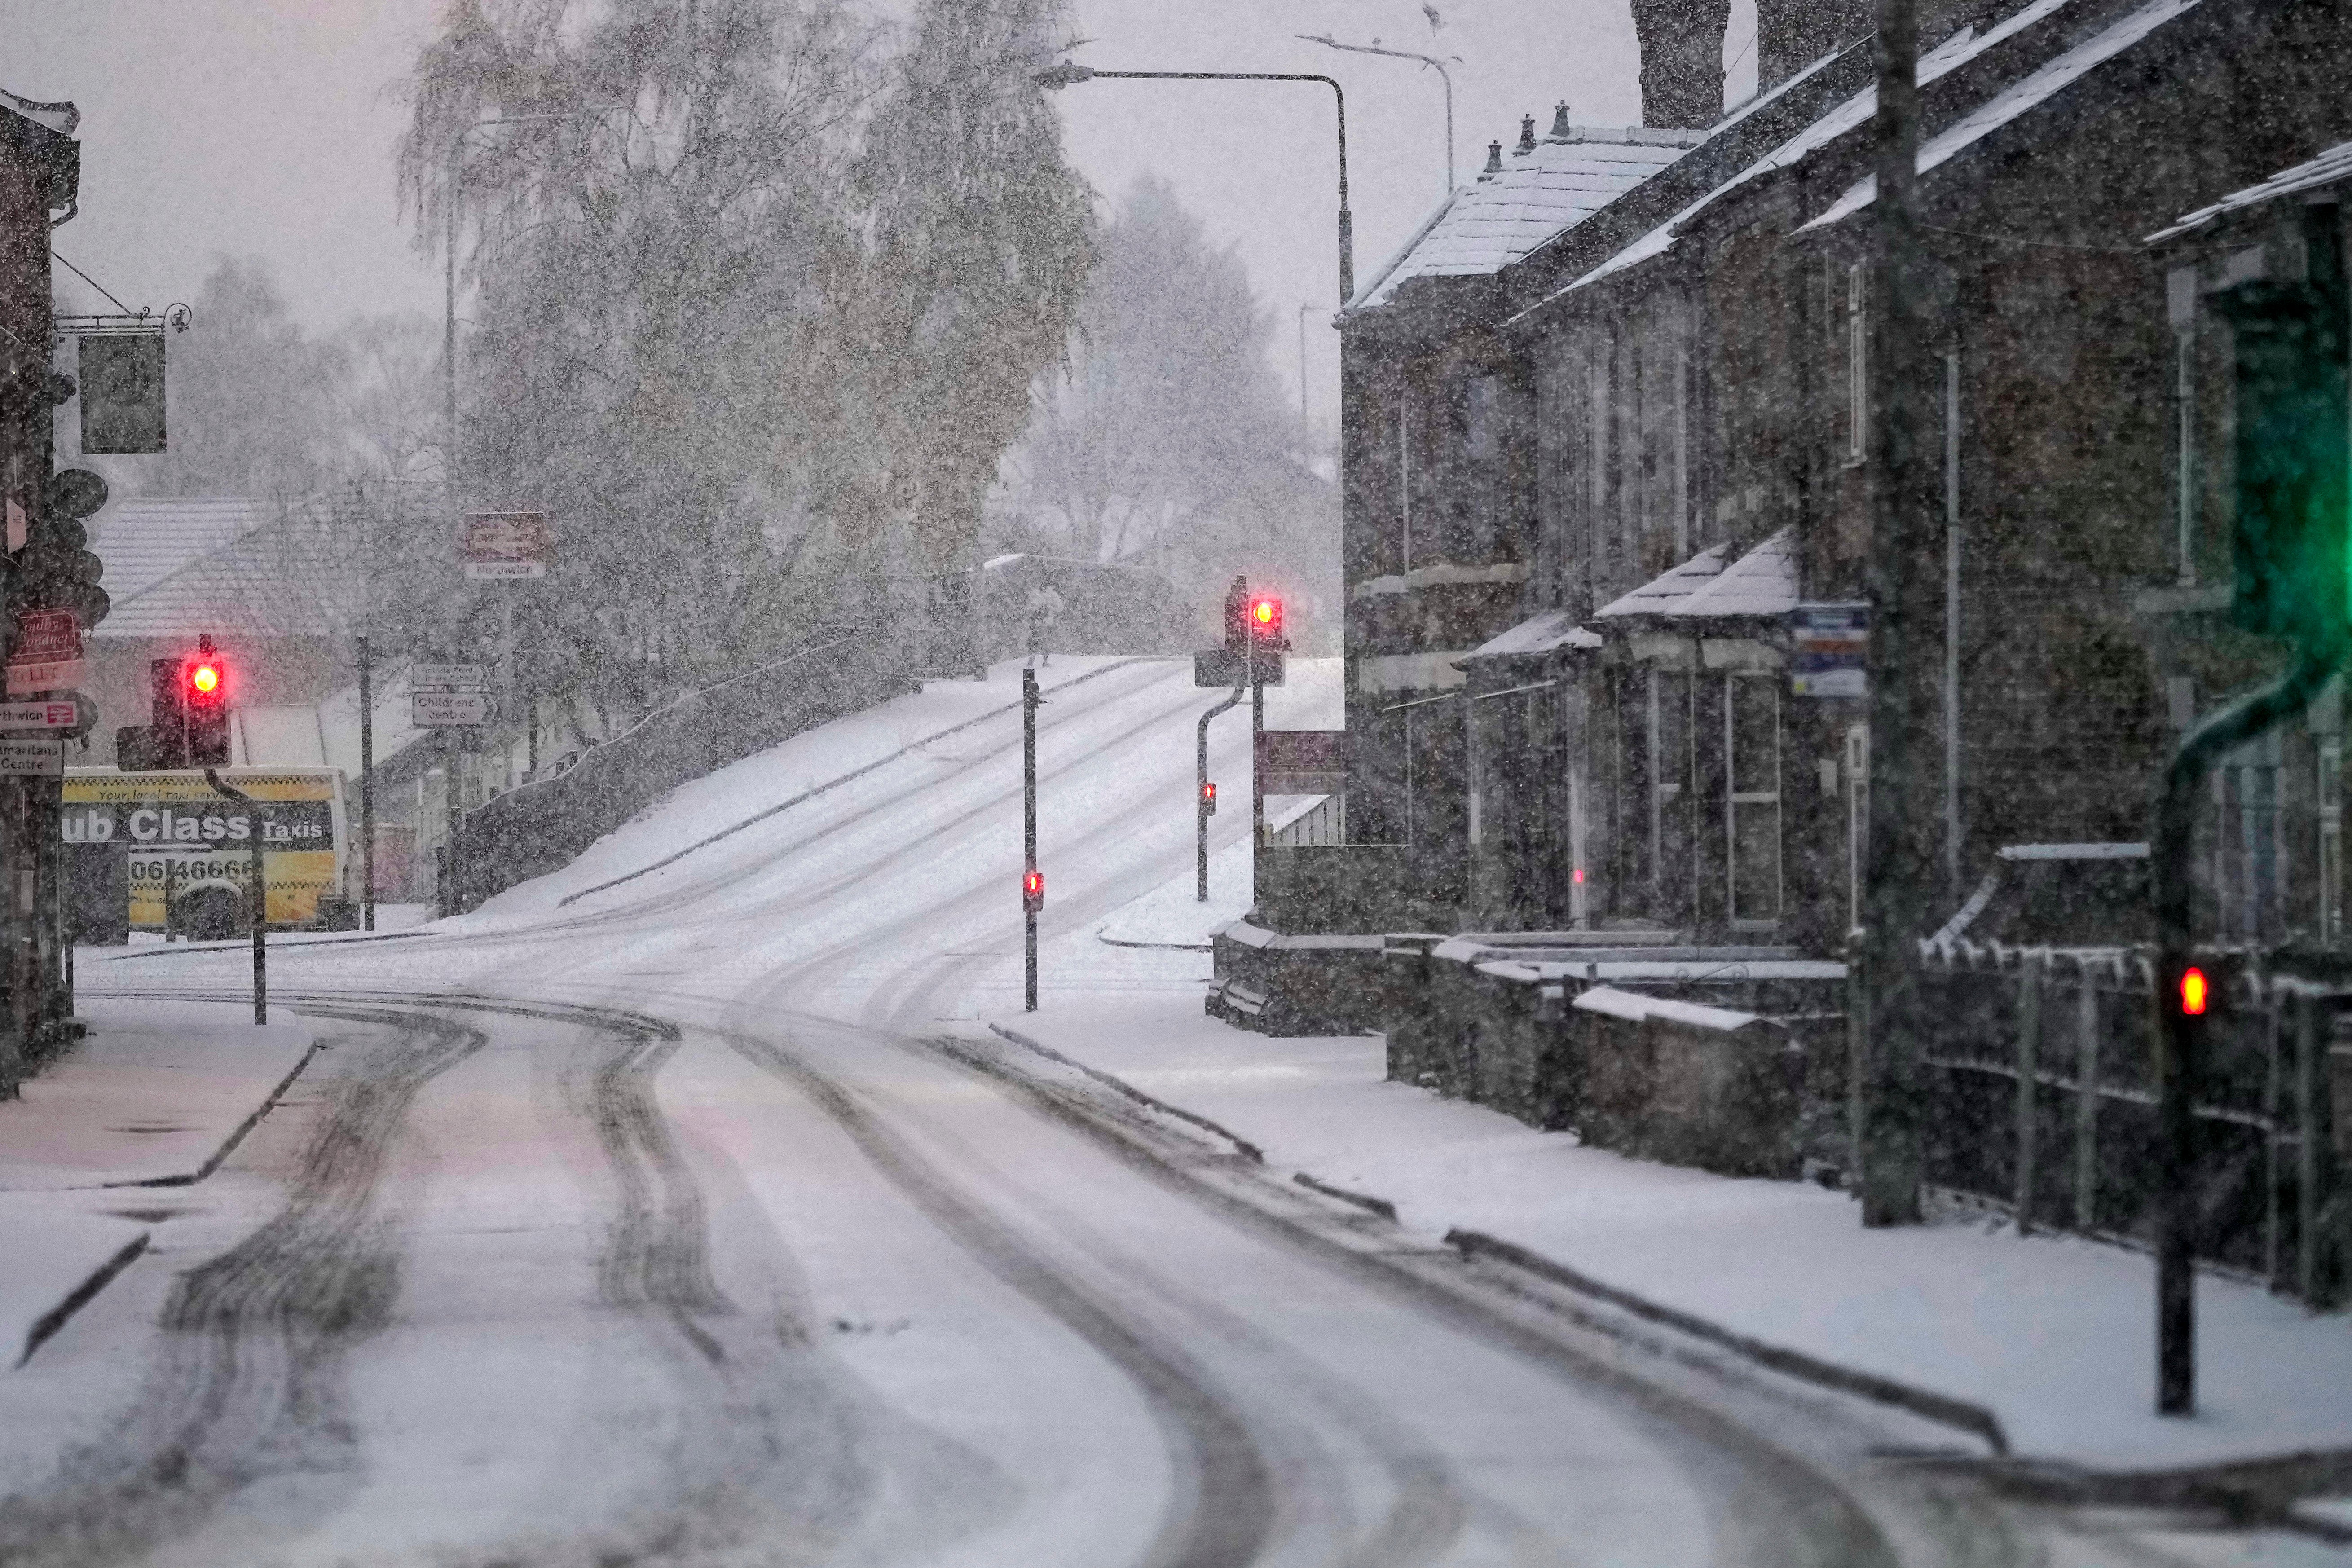 The UK has been hit by a cold snap with snow hitting parts of the country